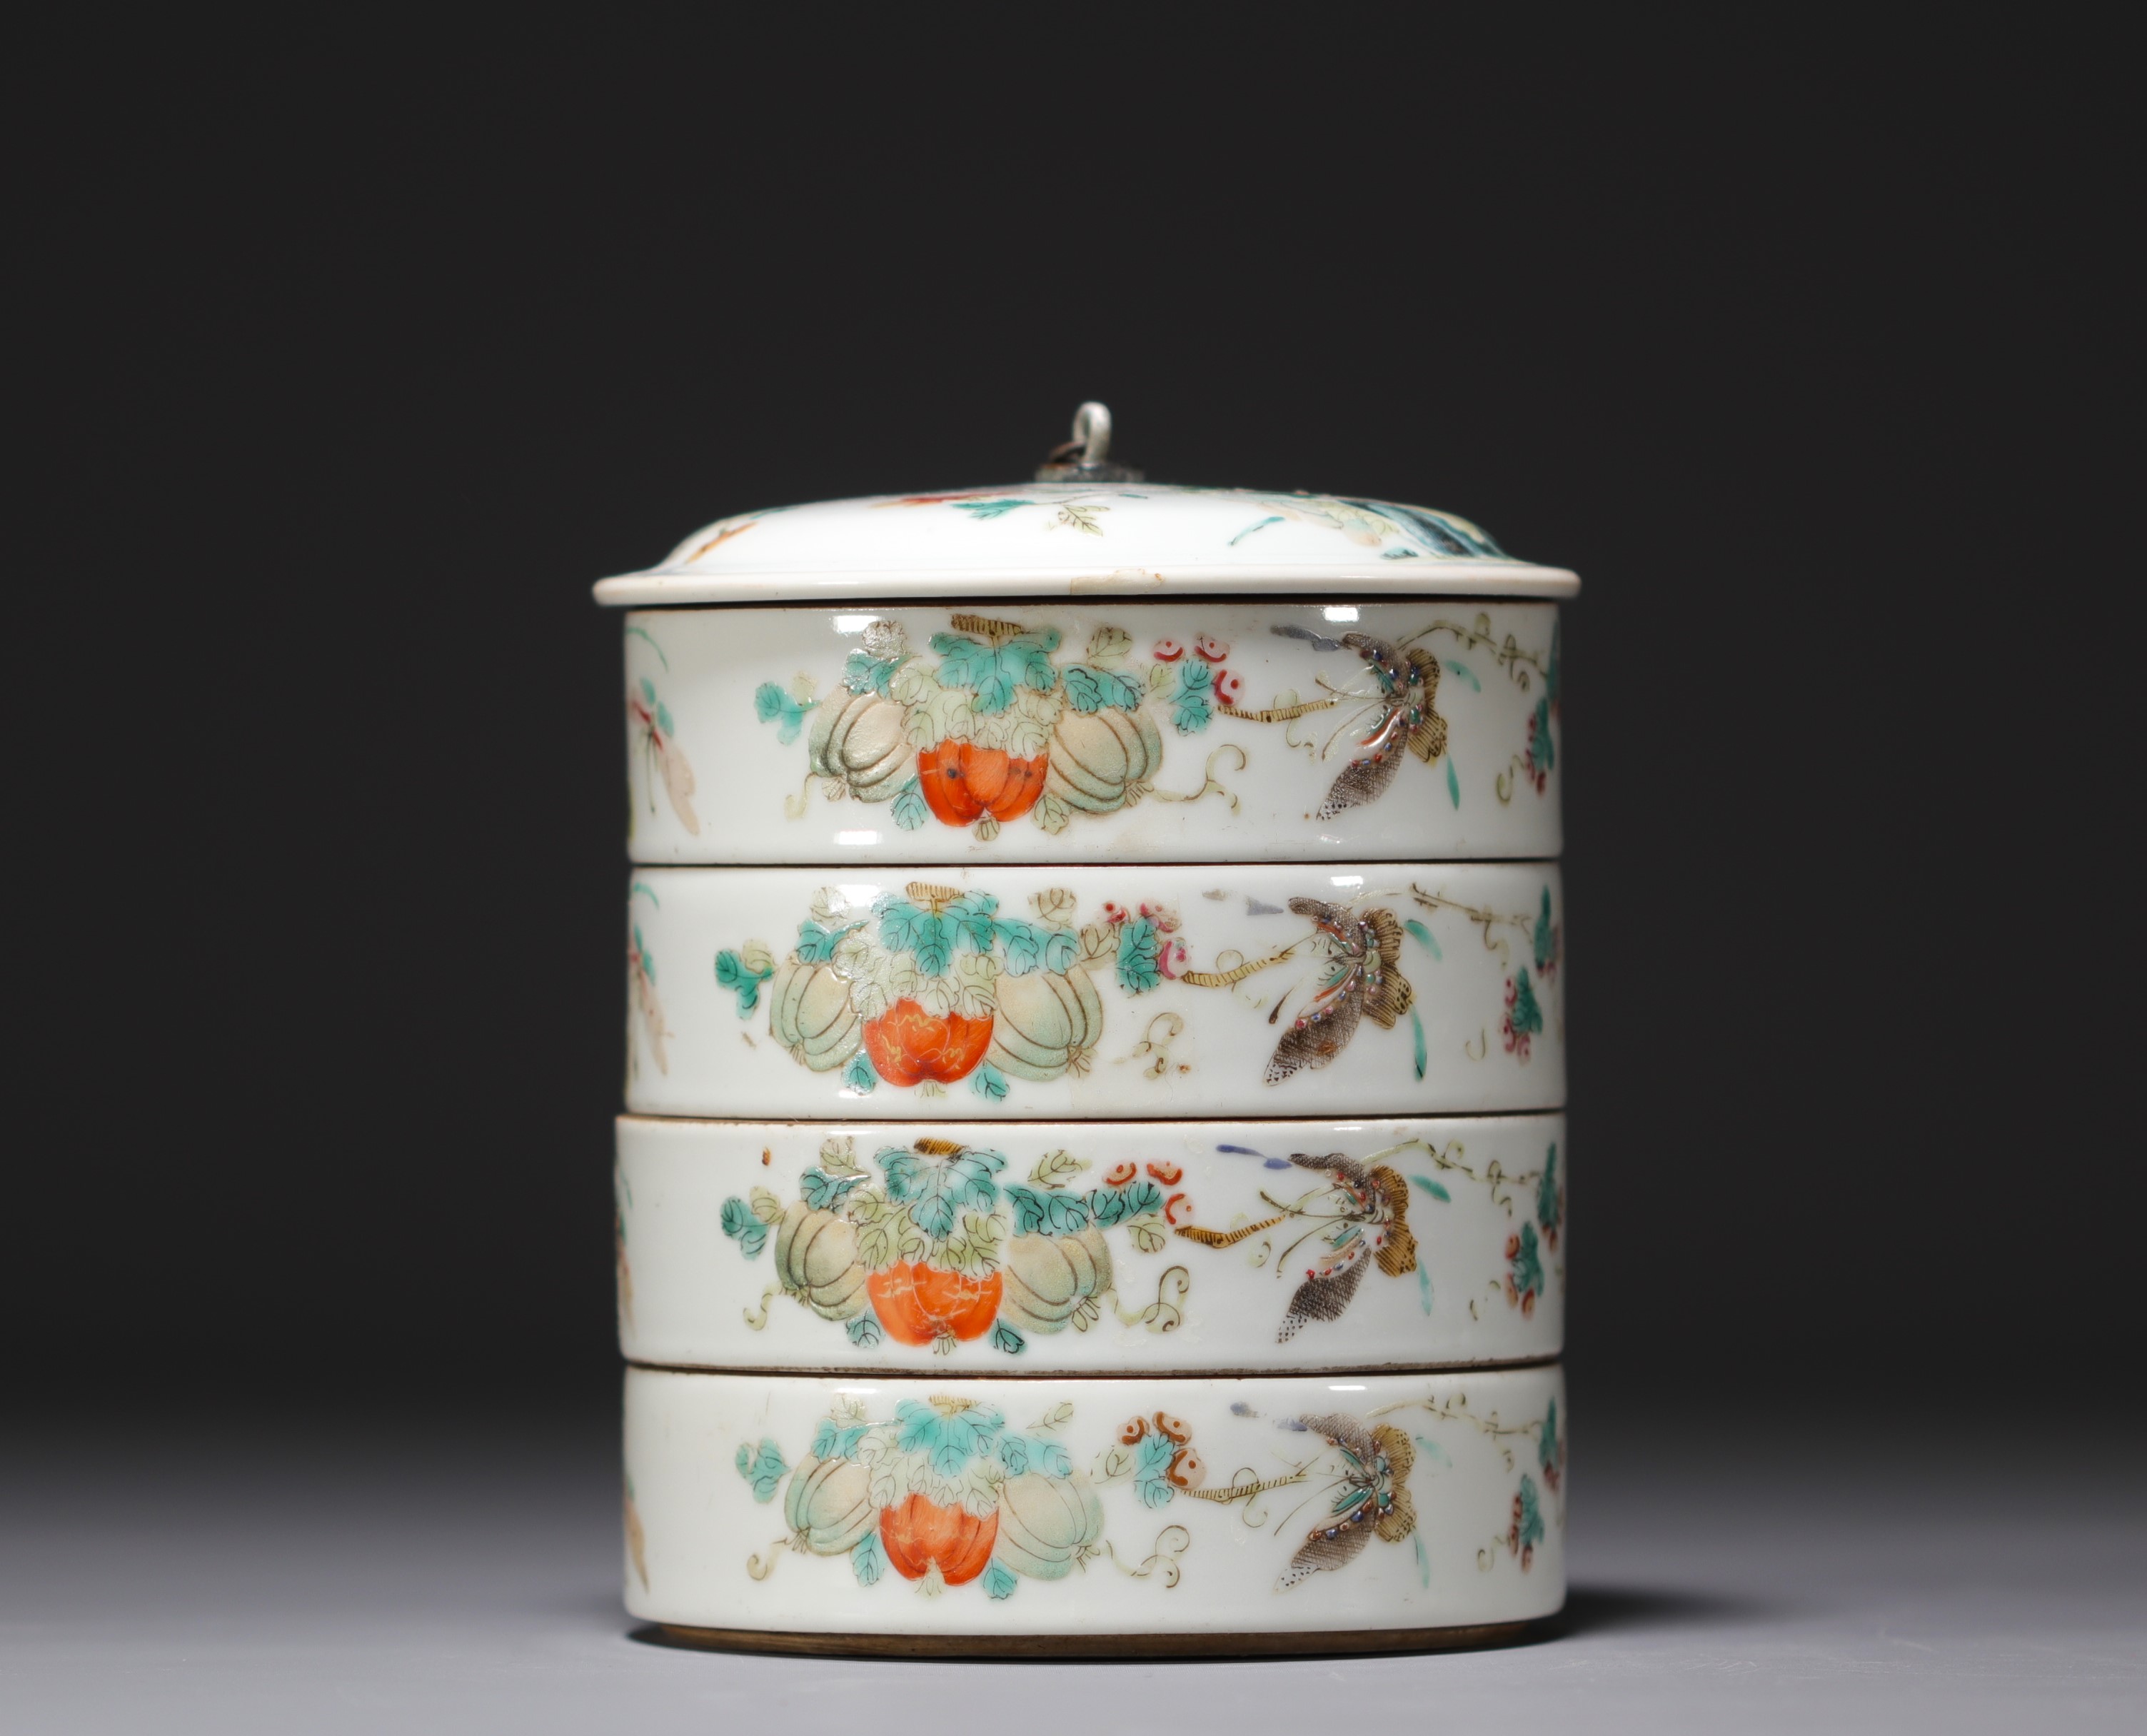 China - Set of four stacking condiment bowls decorated with flowers, famille rose. - Image 3 of 6